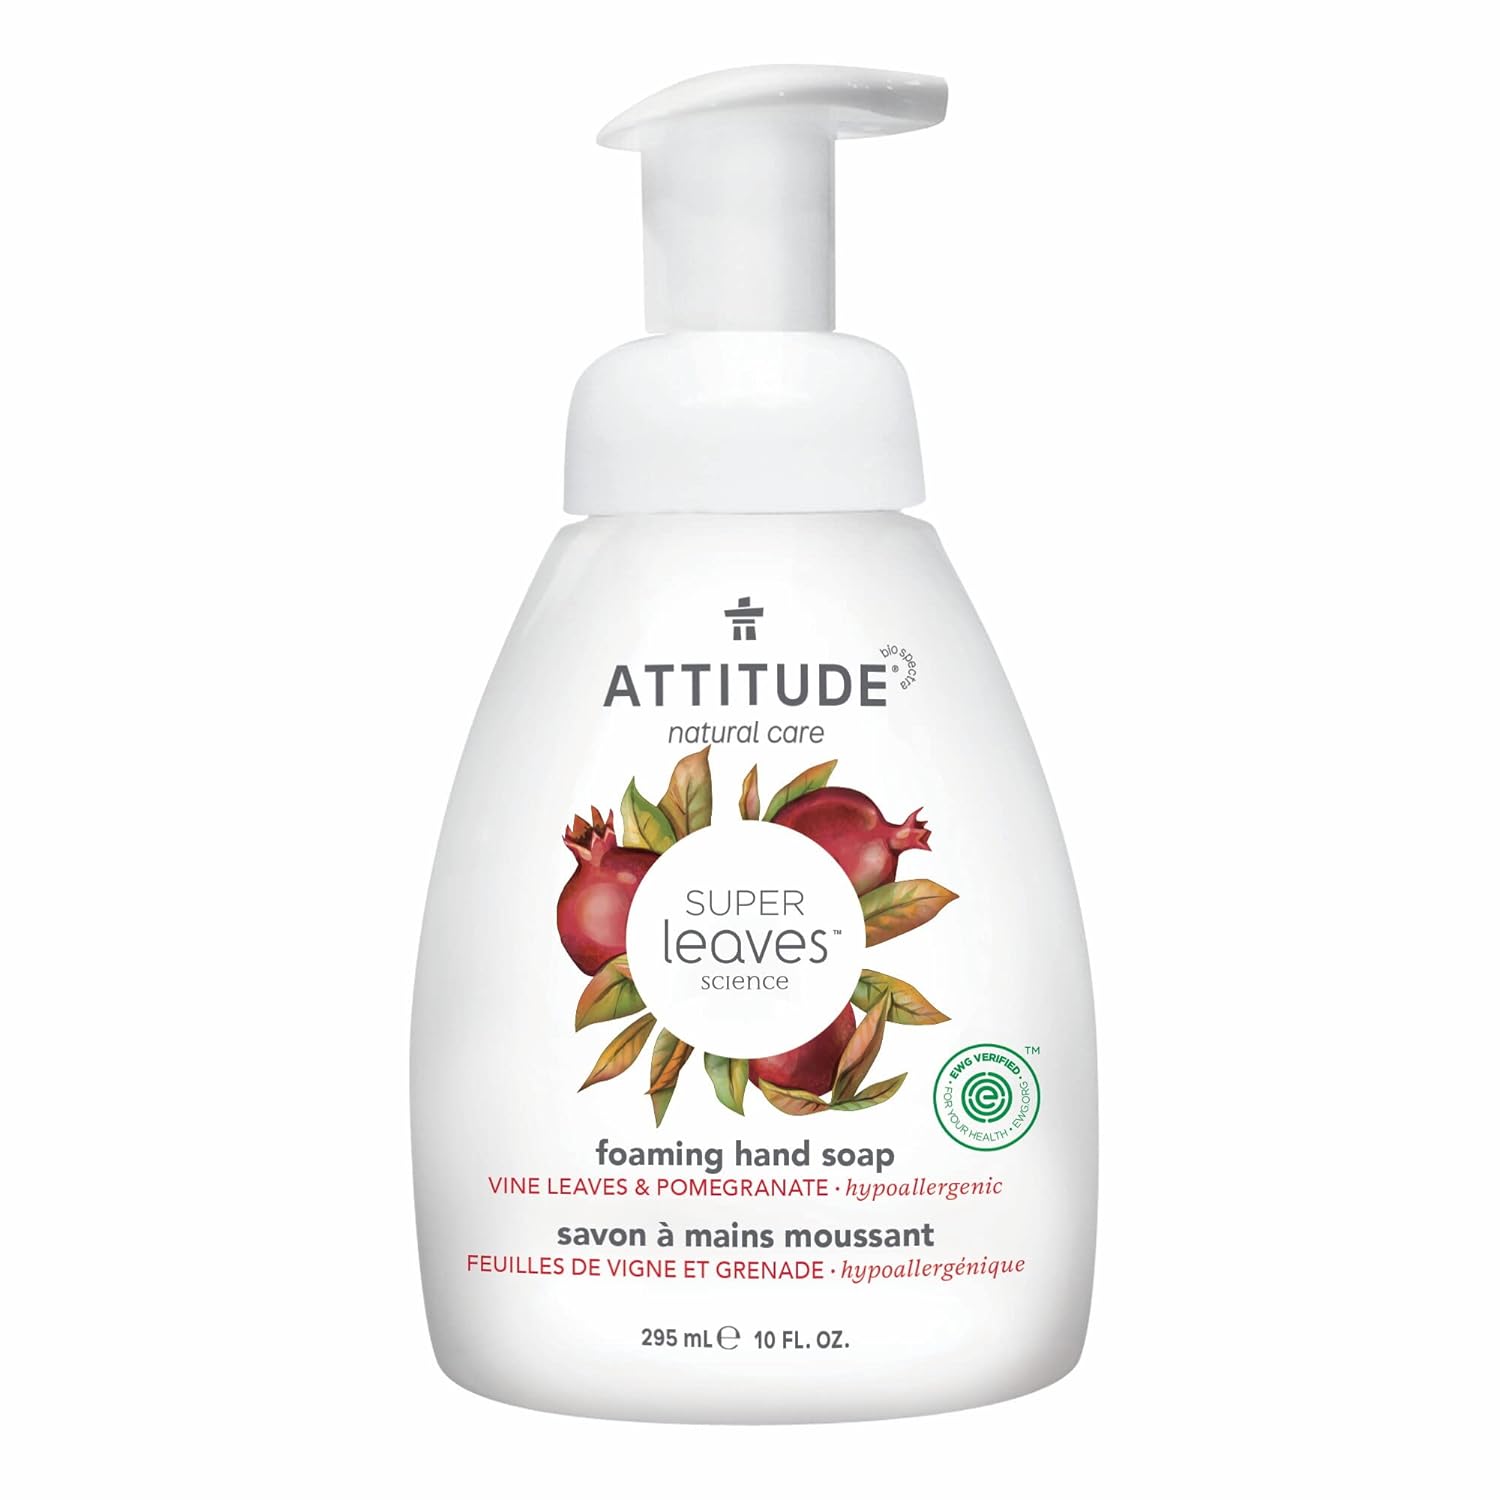 ATTITUDE Foaming Hand Soap, EWG Verified, Dermatologically Tested, Plant and Mineral-Based, Vegan Personal Care Products, Vine Leaves and Pomegranate, 10 Fl Oz